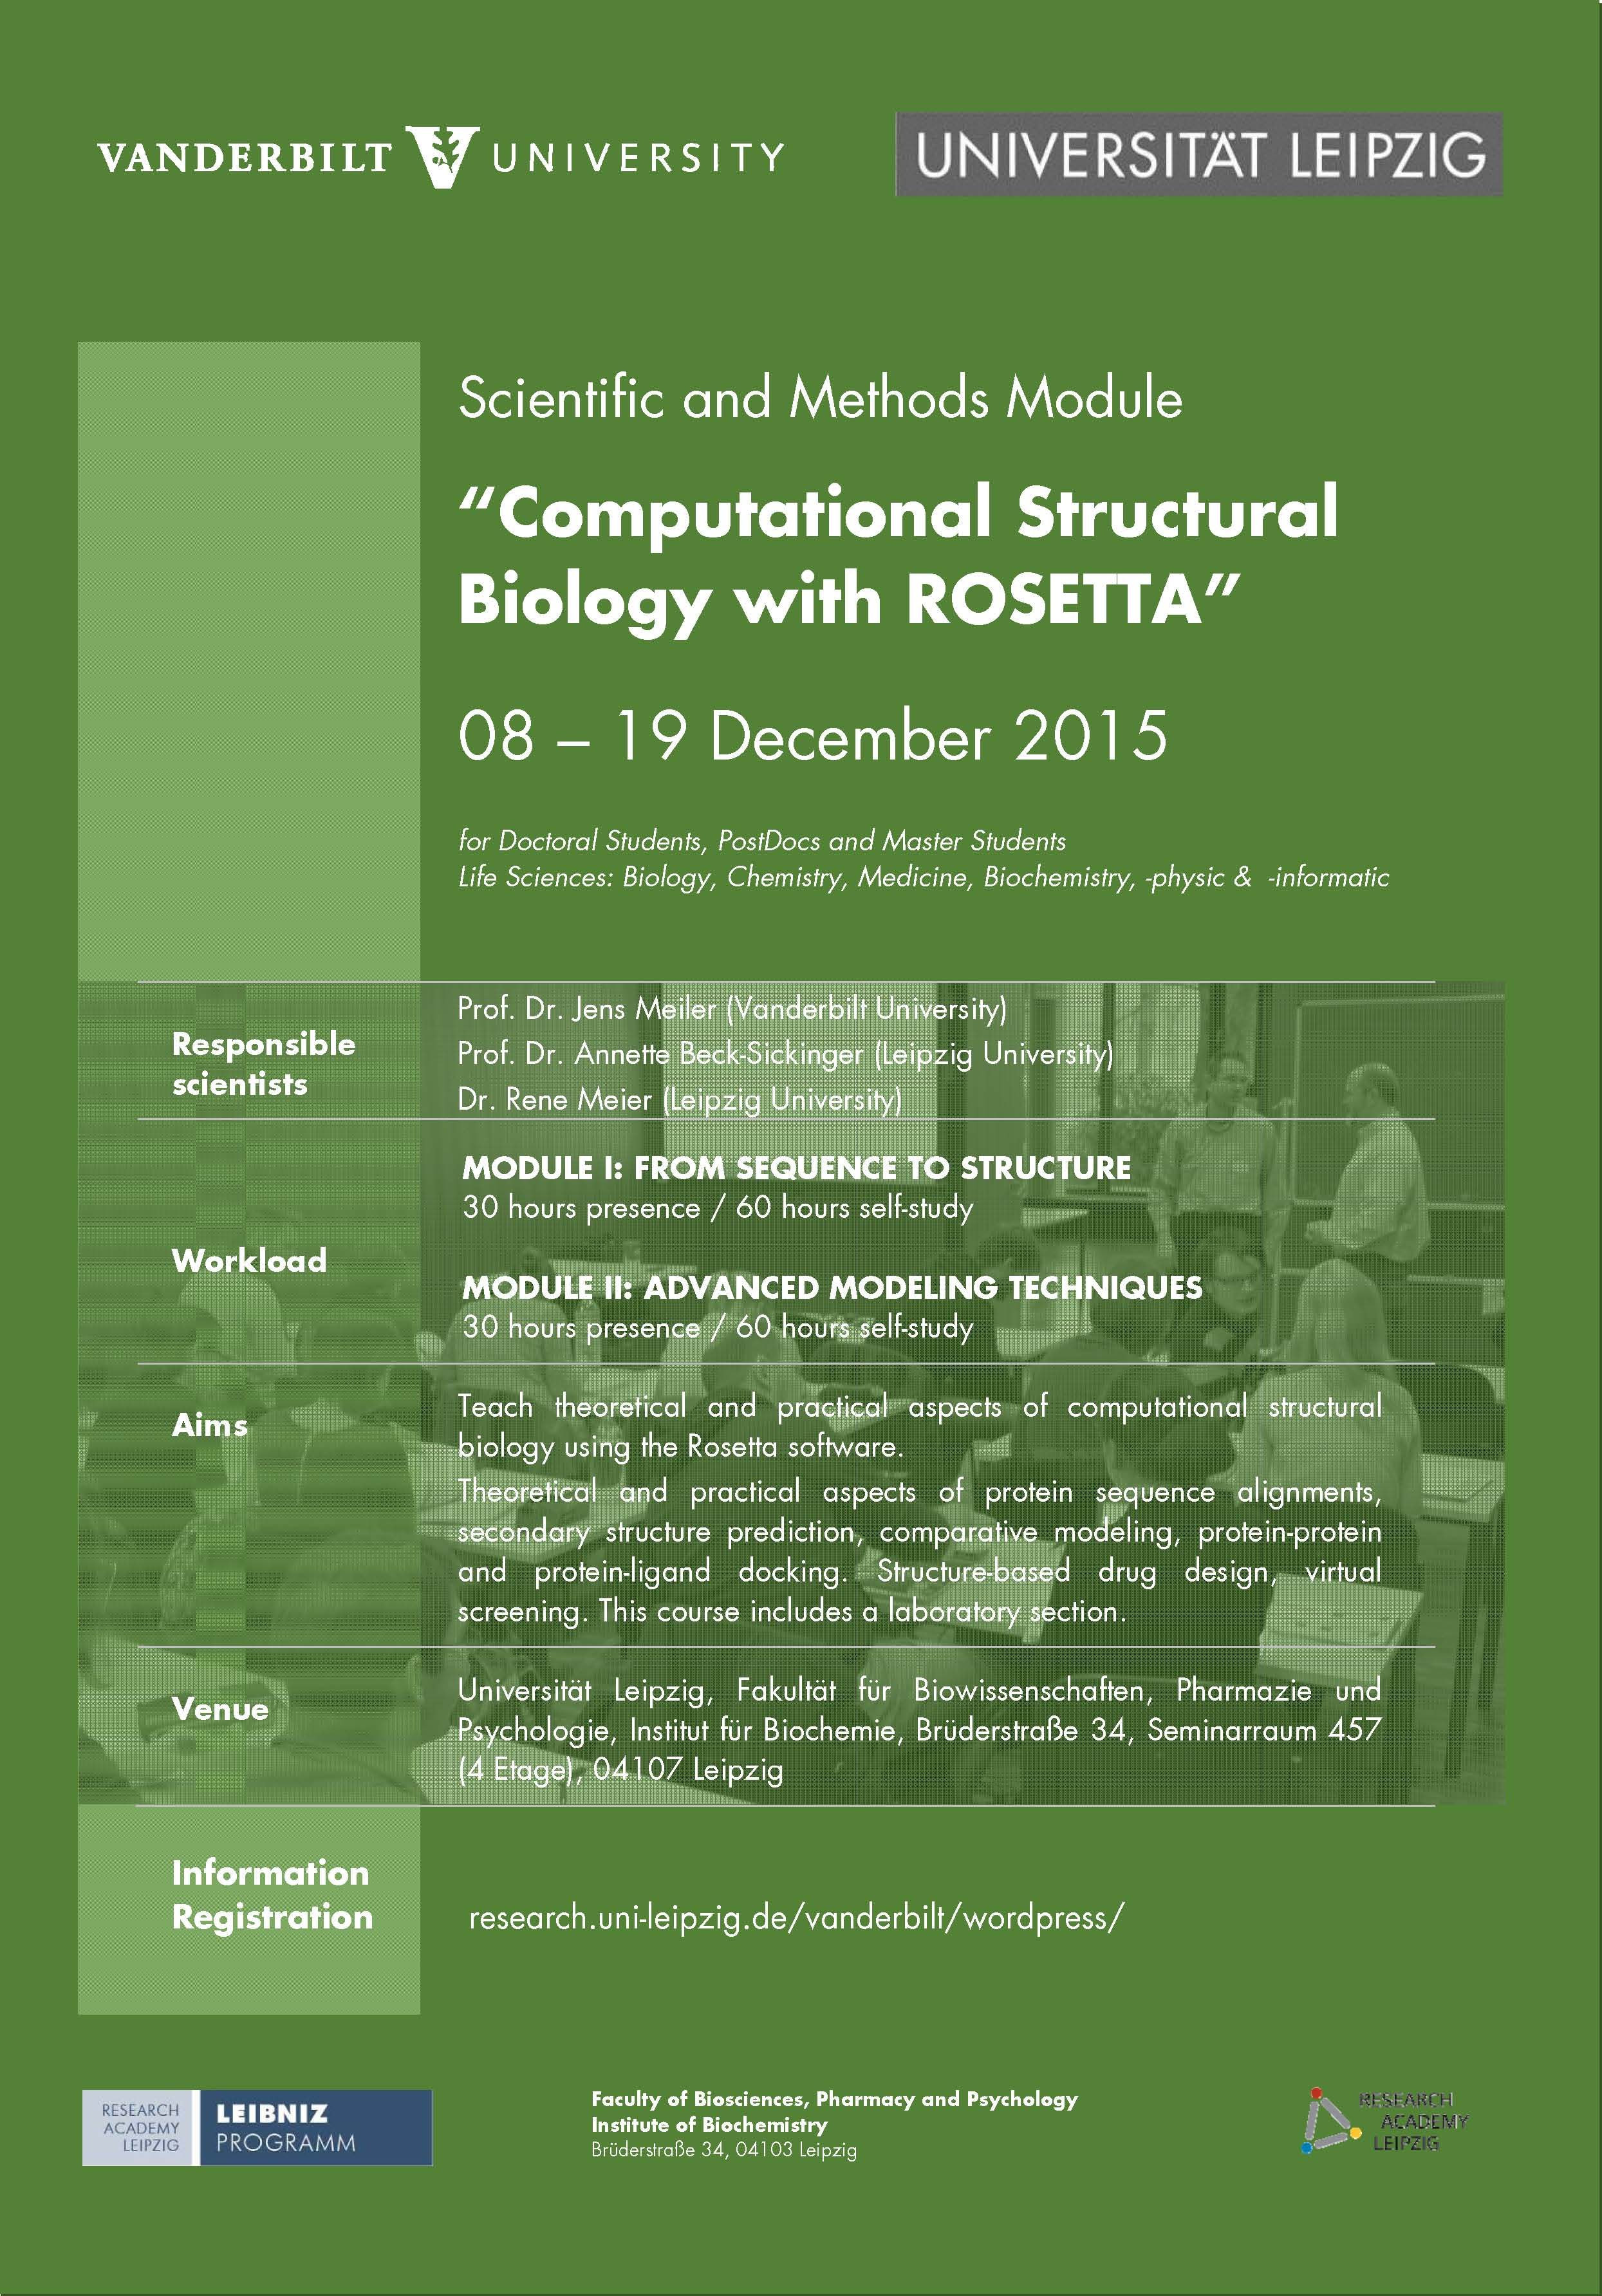 Announcement: Scientific and Methode Modules “COMPUTATIONAL STRUCTURAL BIOLOGY WITH ROSETTA” at Leipzig University